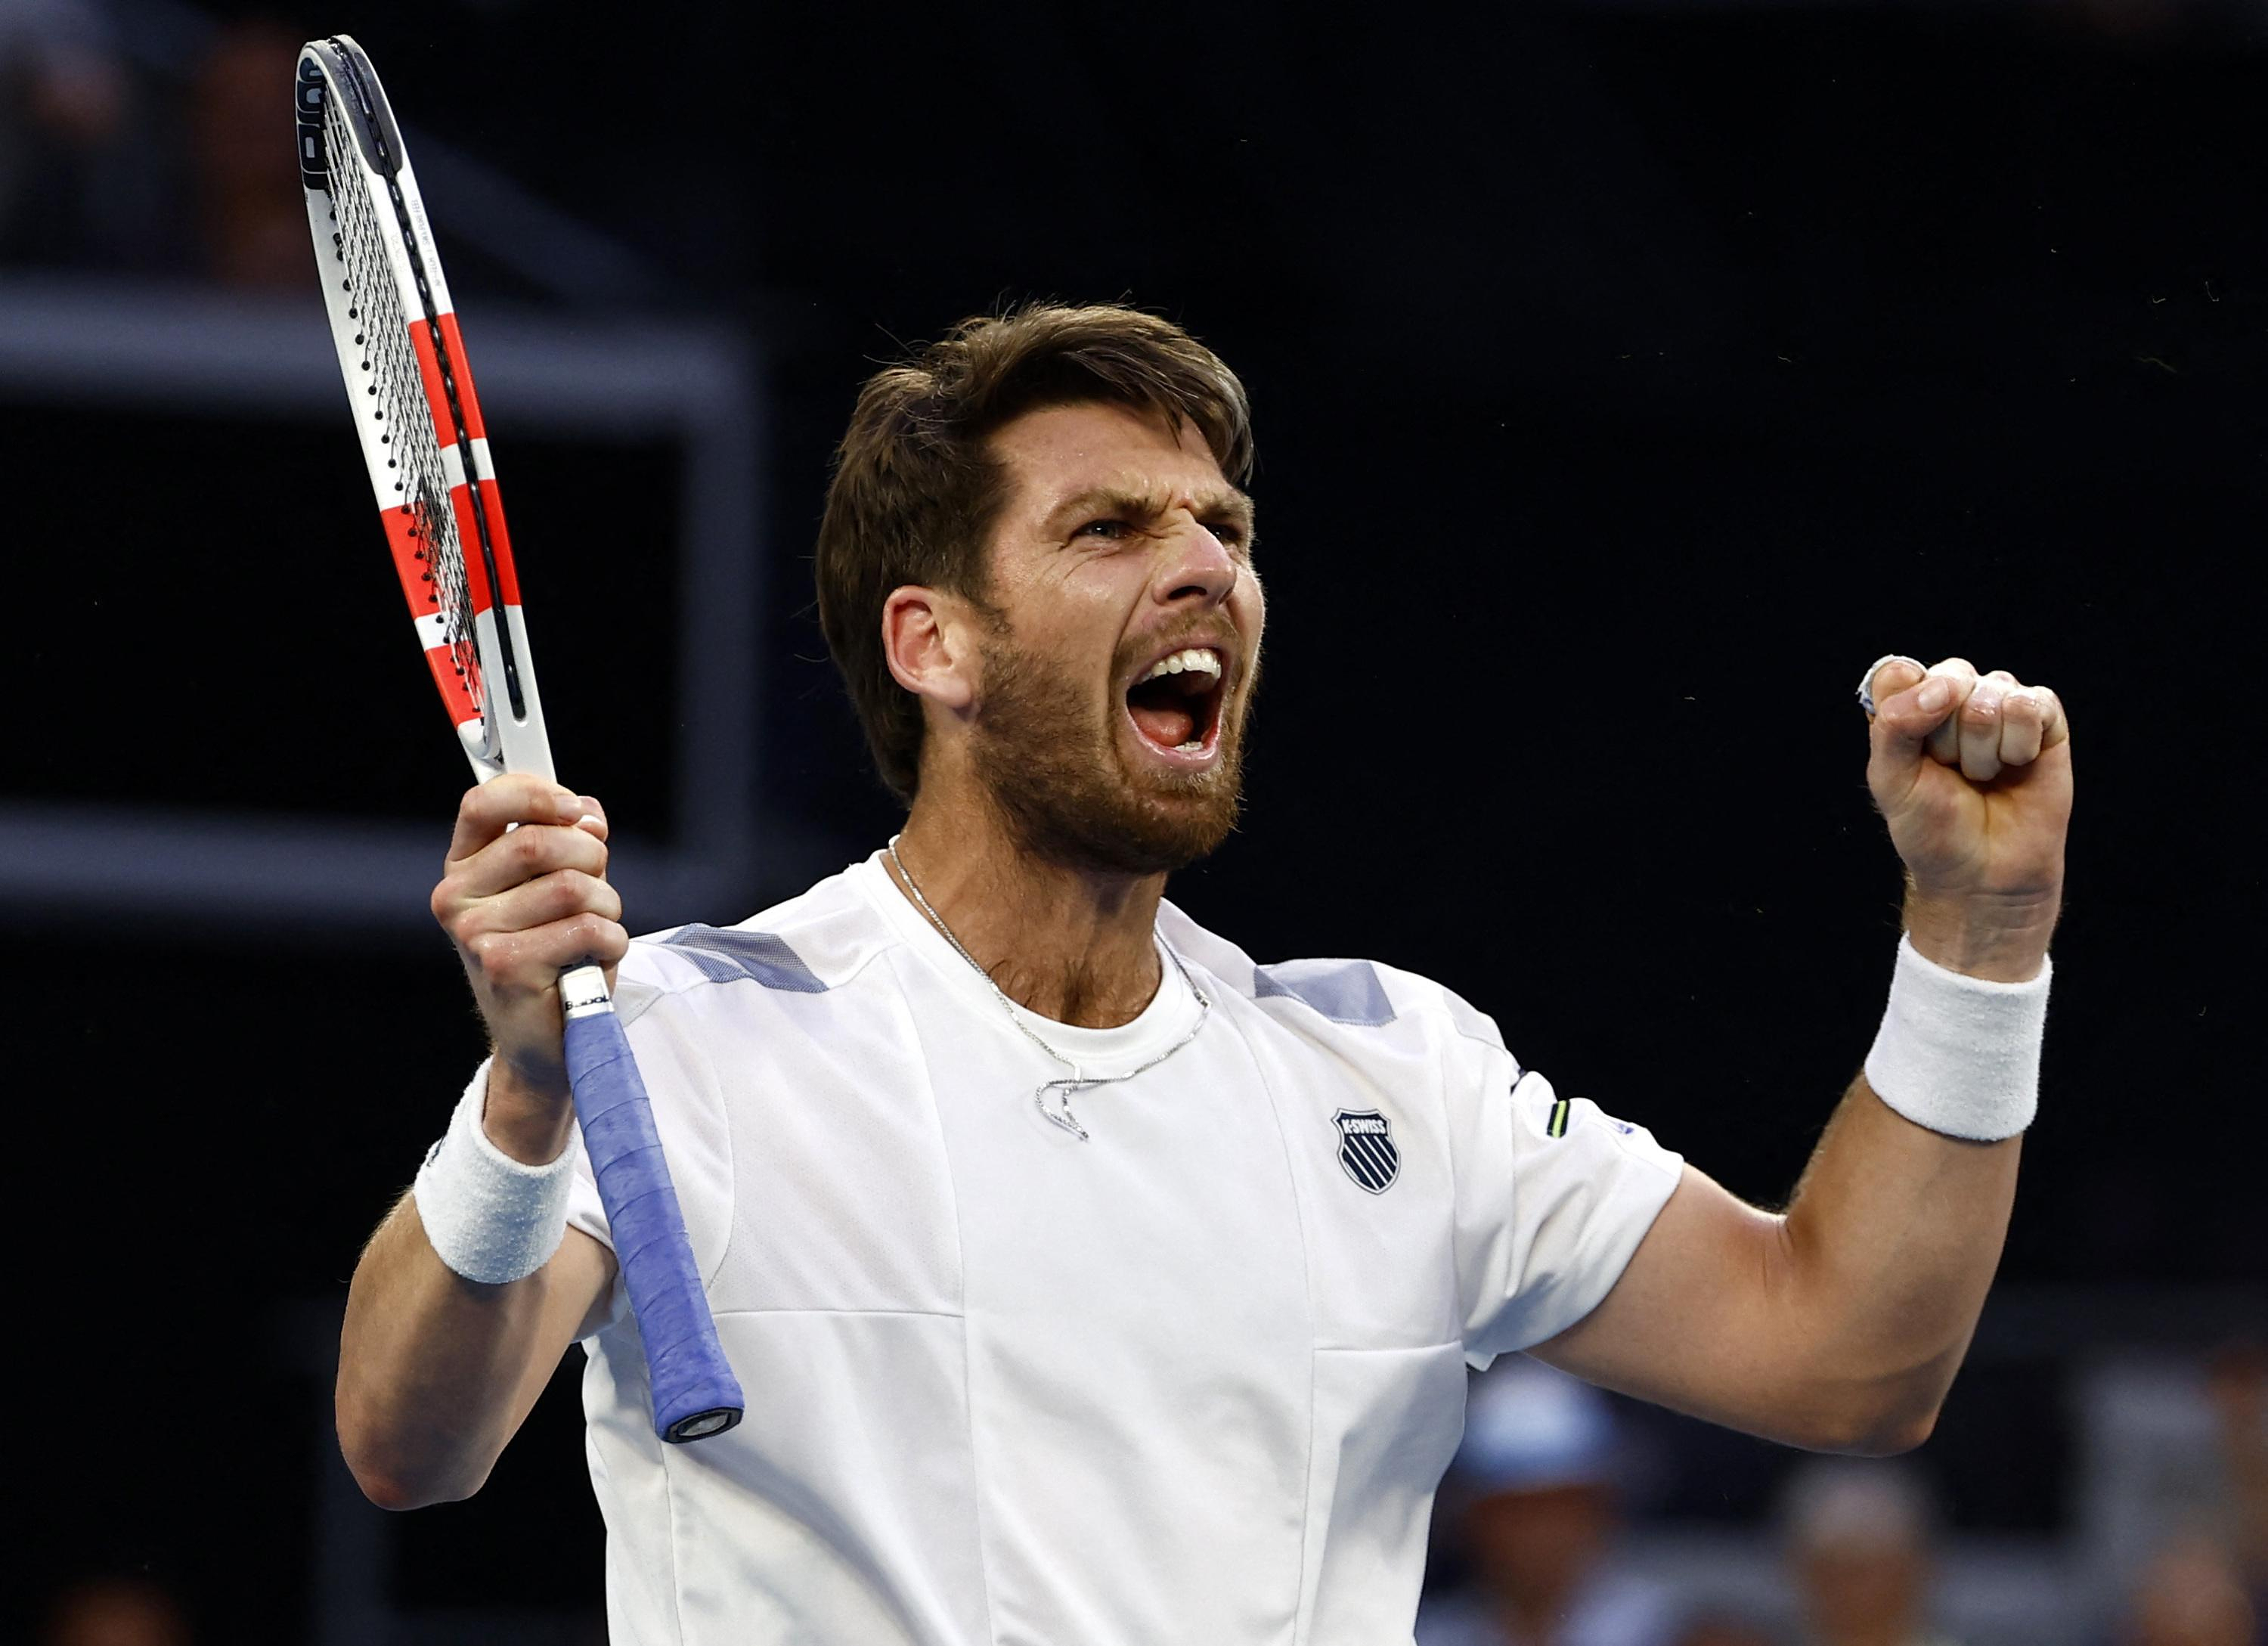 Australian Open: Norrie knocks down Ruud and advances to the round of 16